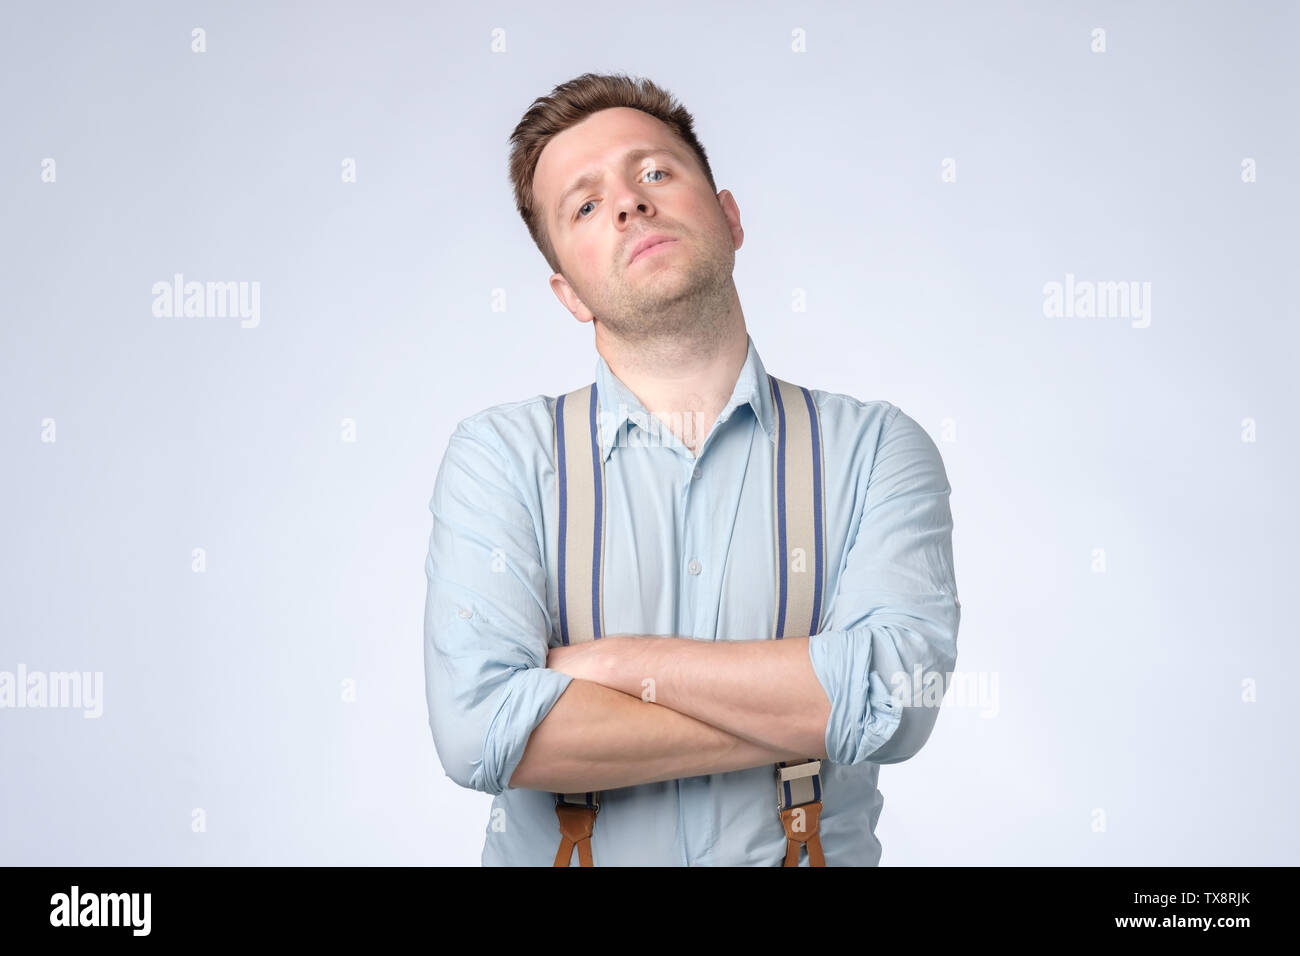 Serious selfish man with folded arms and suspenders posing at studio. Stock Photo